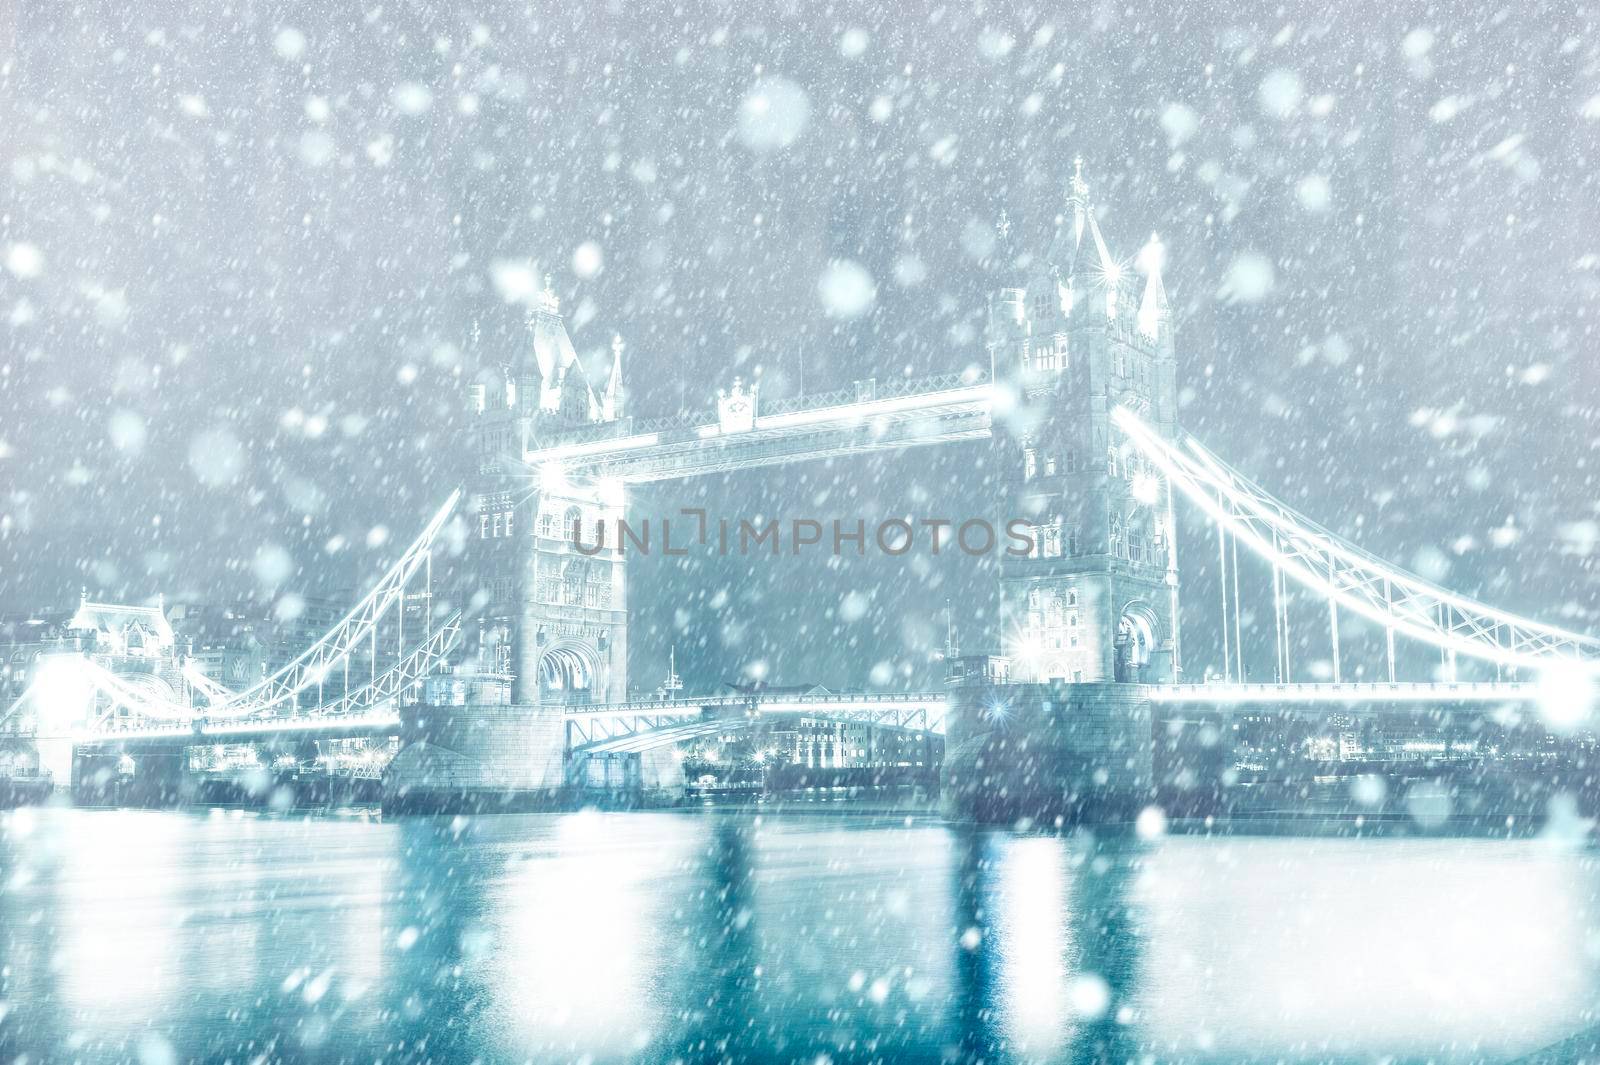 View of Tower Bridge in London with snow by night